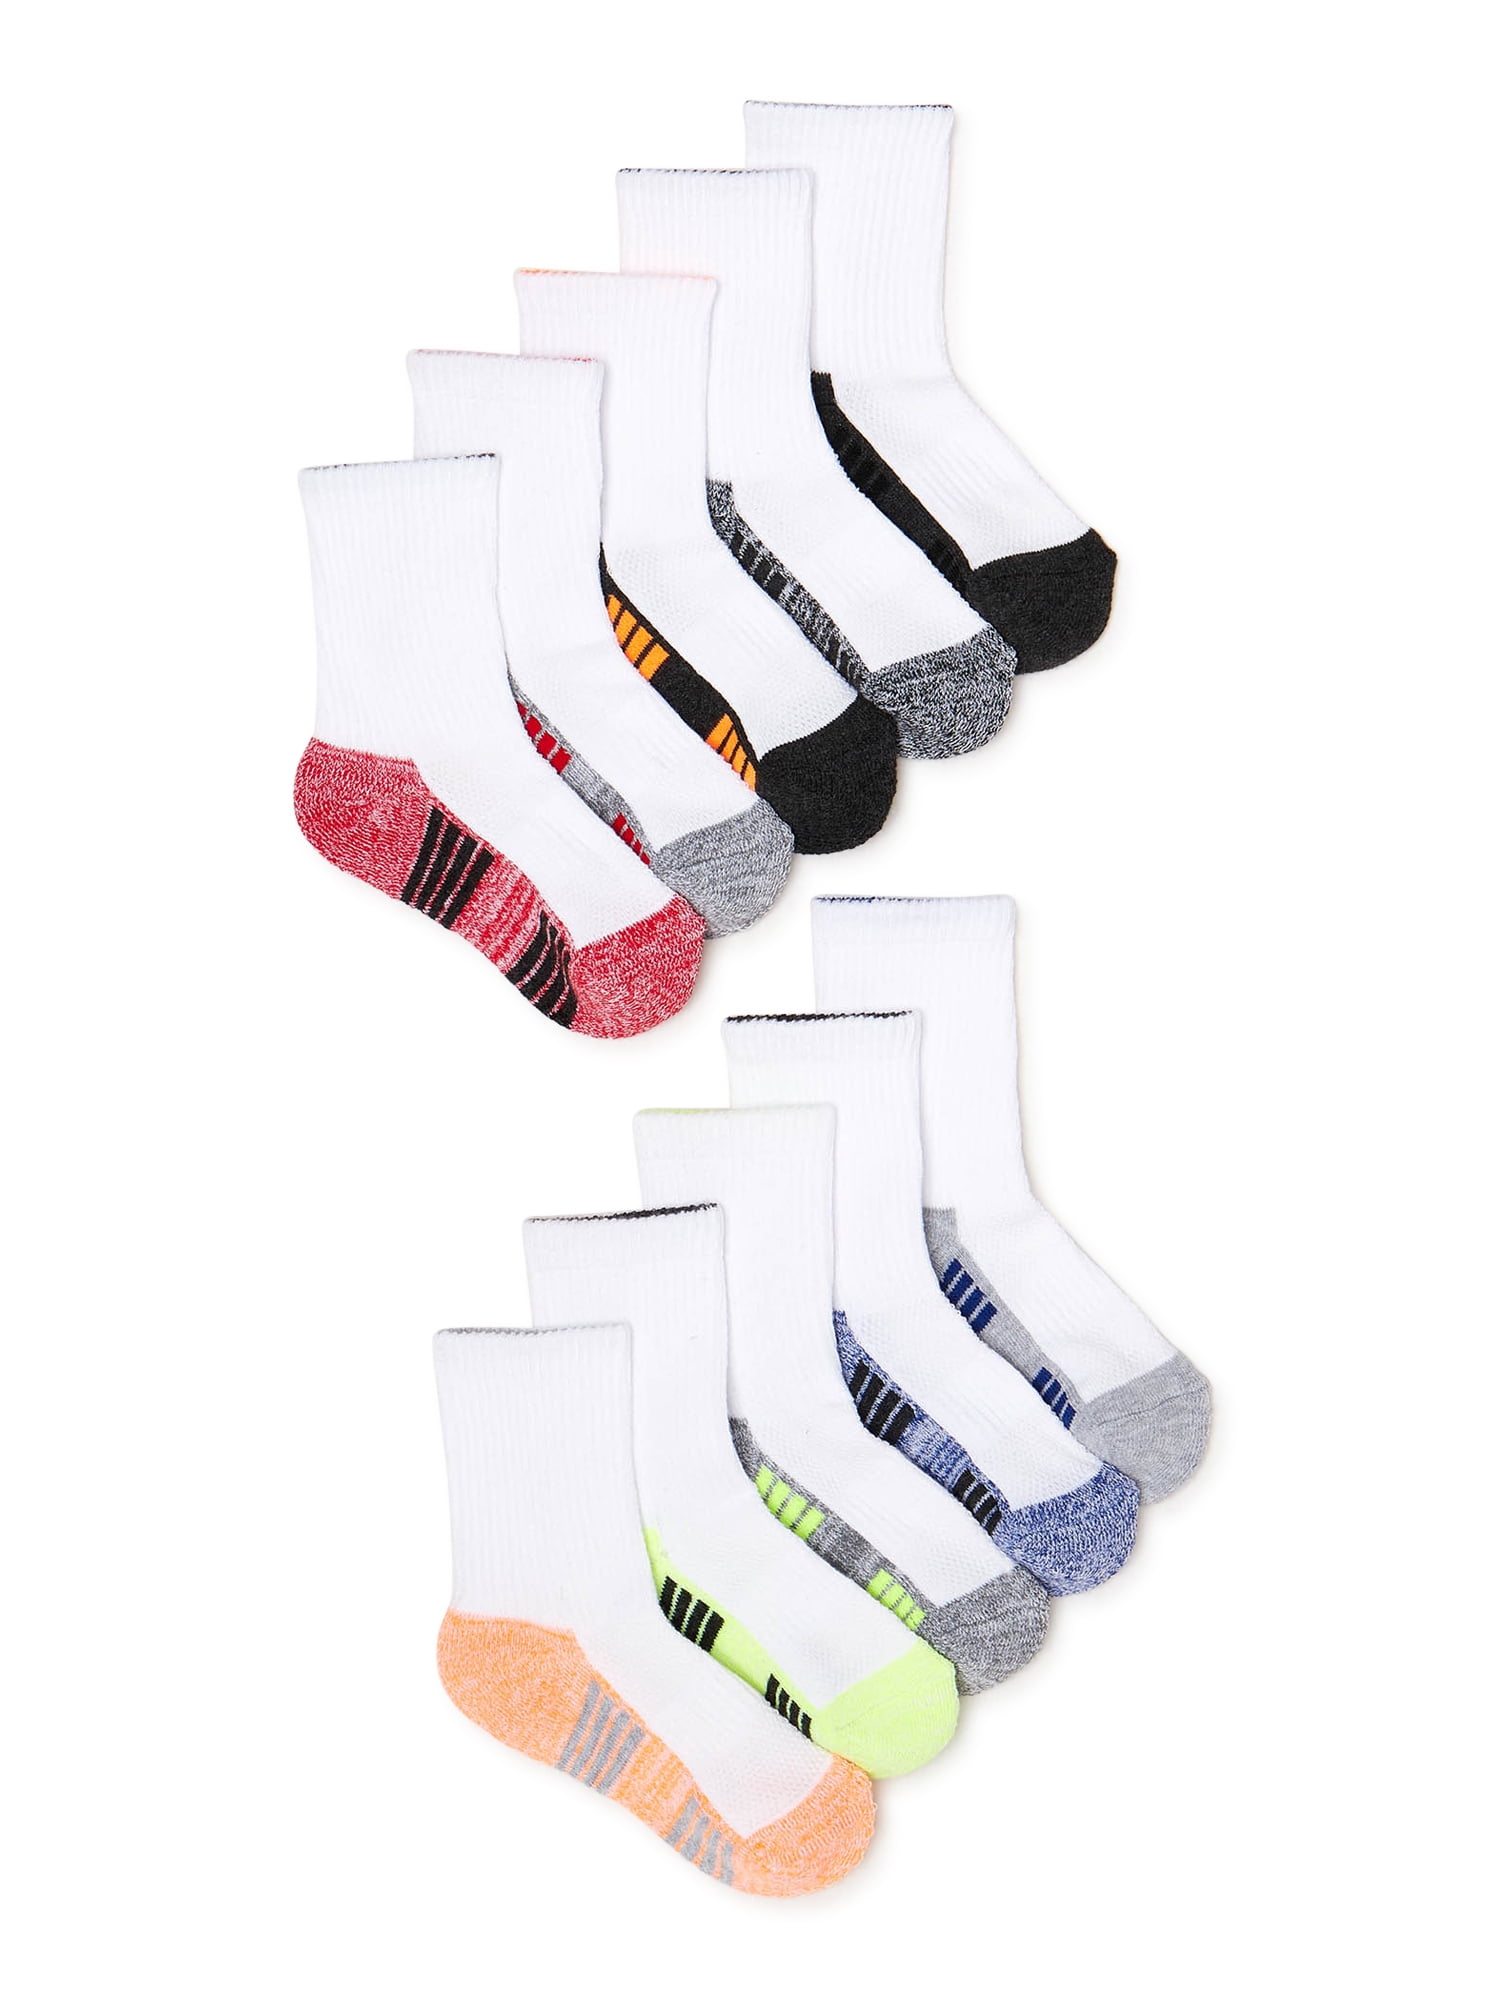 Mens Fashion Performance Polyester Socks Two Cute Hand Drawn Dogs Casual Athletic Crew Socks. 